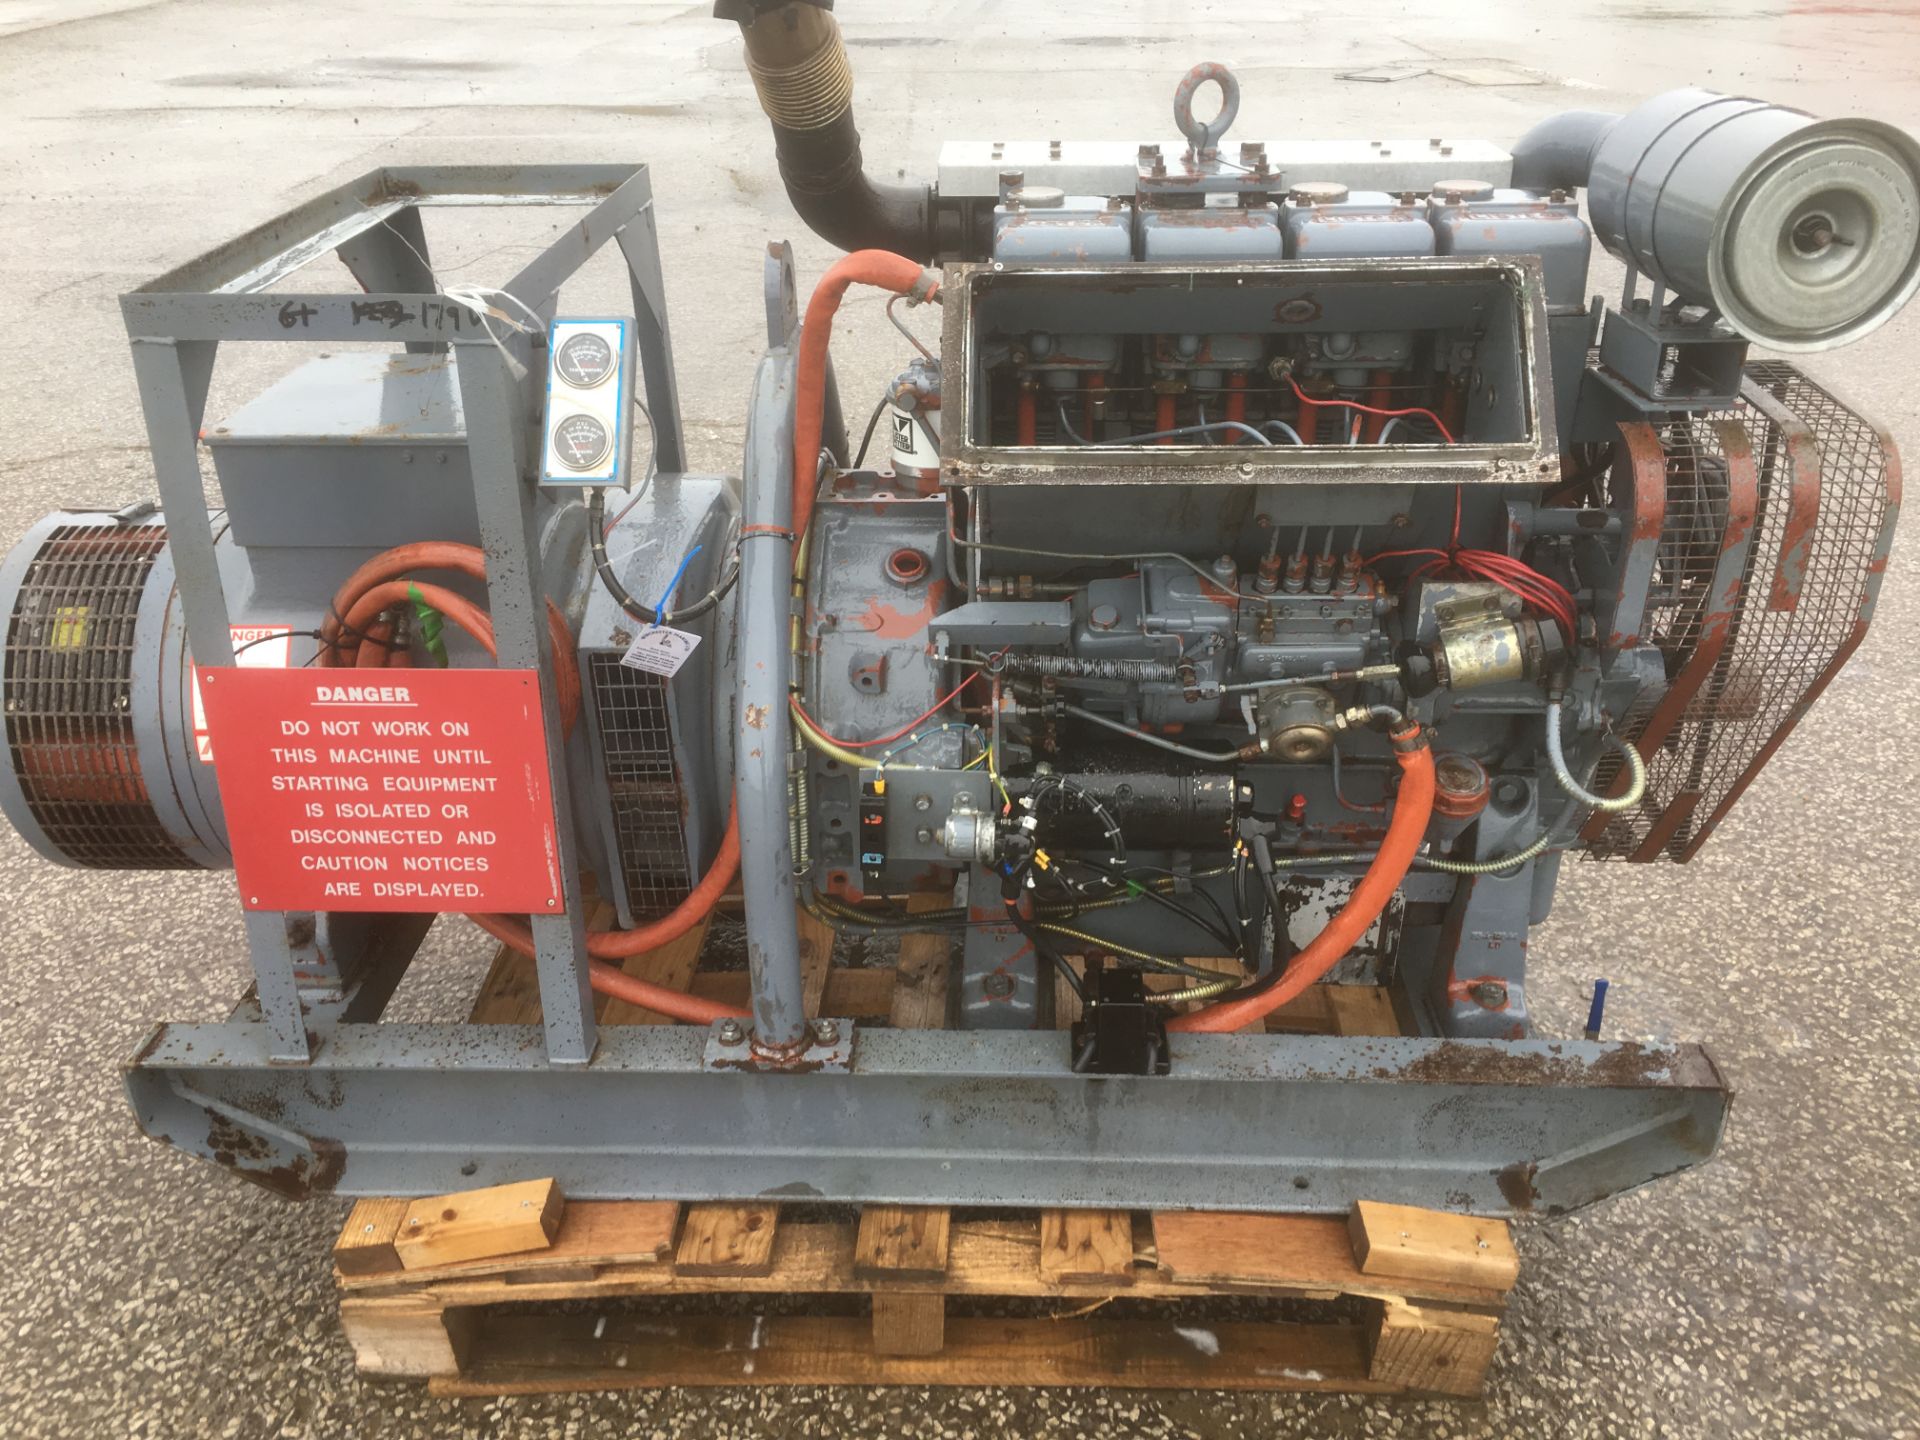 Lister/Dale 33.5KVA Standby Generator.